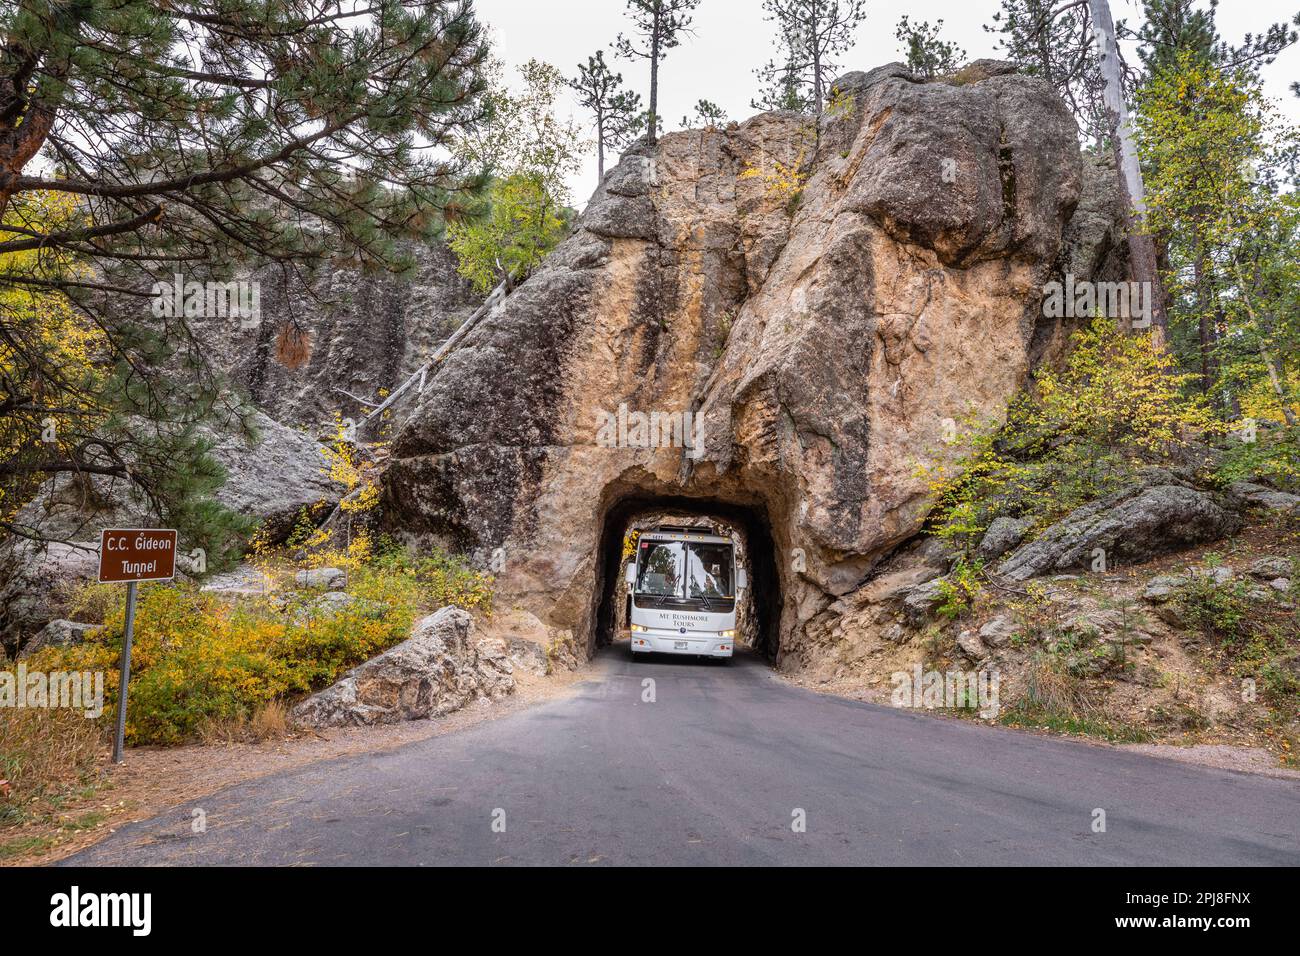 Doane Robinson Tunnel along the Scenic Iron Mountain Road between Mount Rushmore and Custer State Park, South Dakota, United States of America Stock Photo